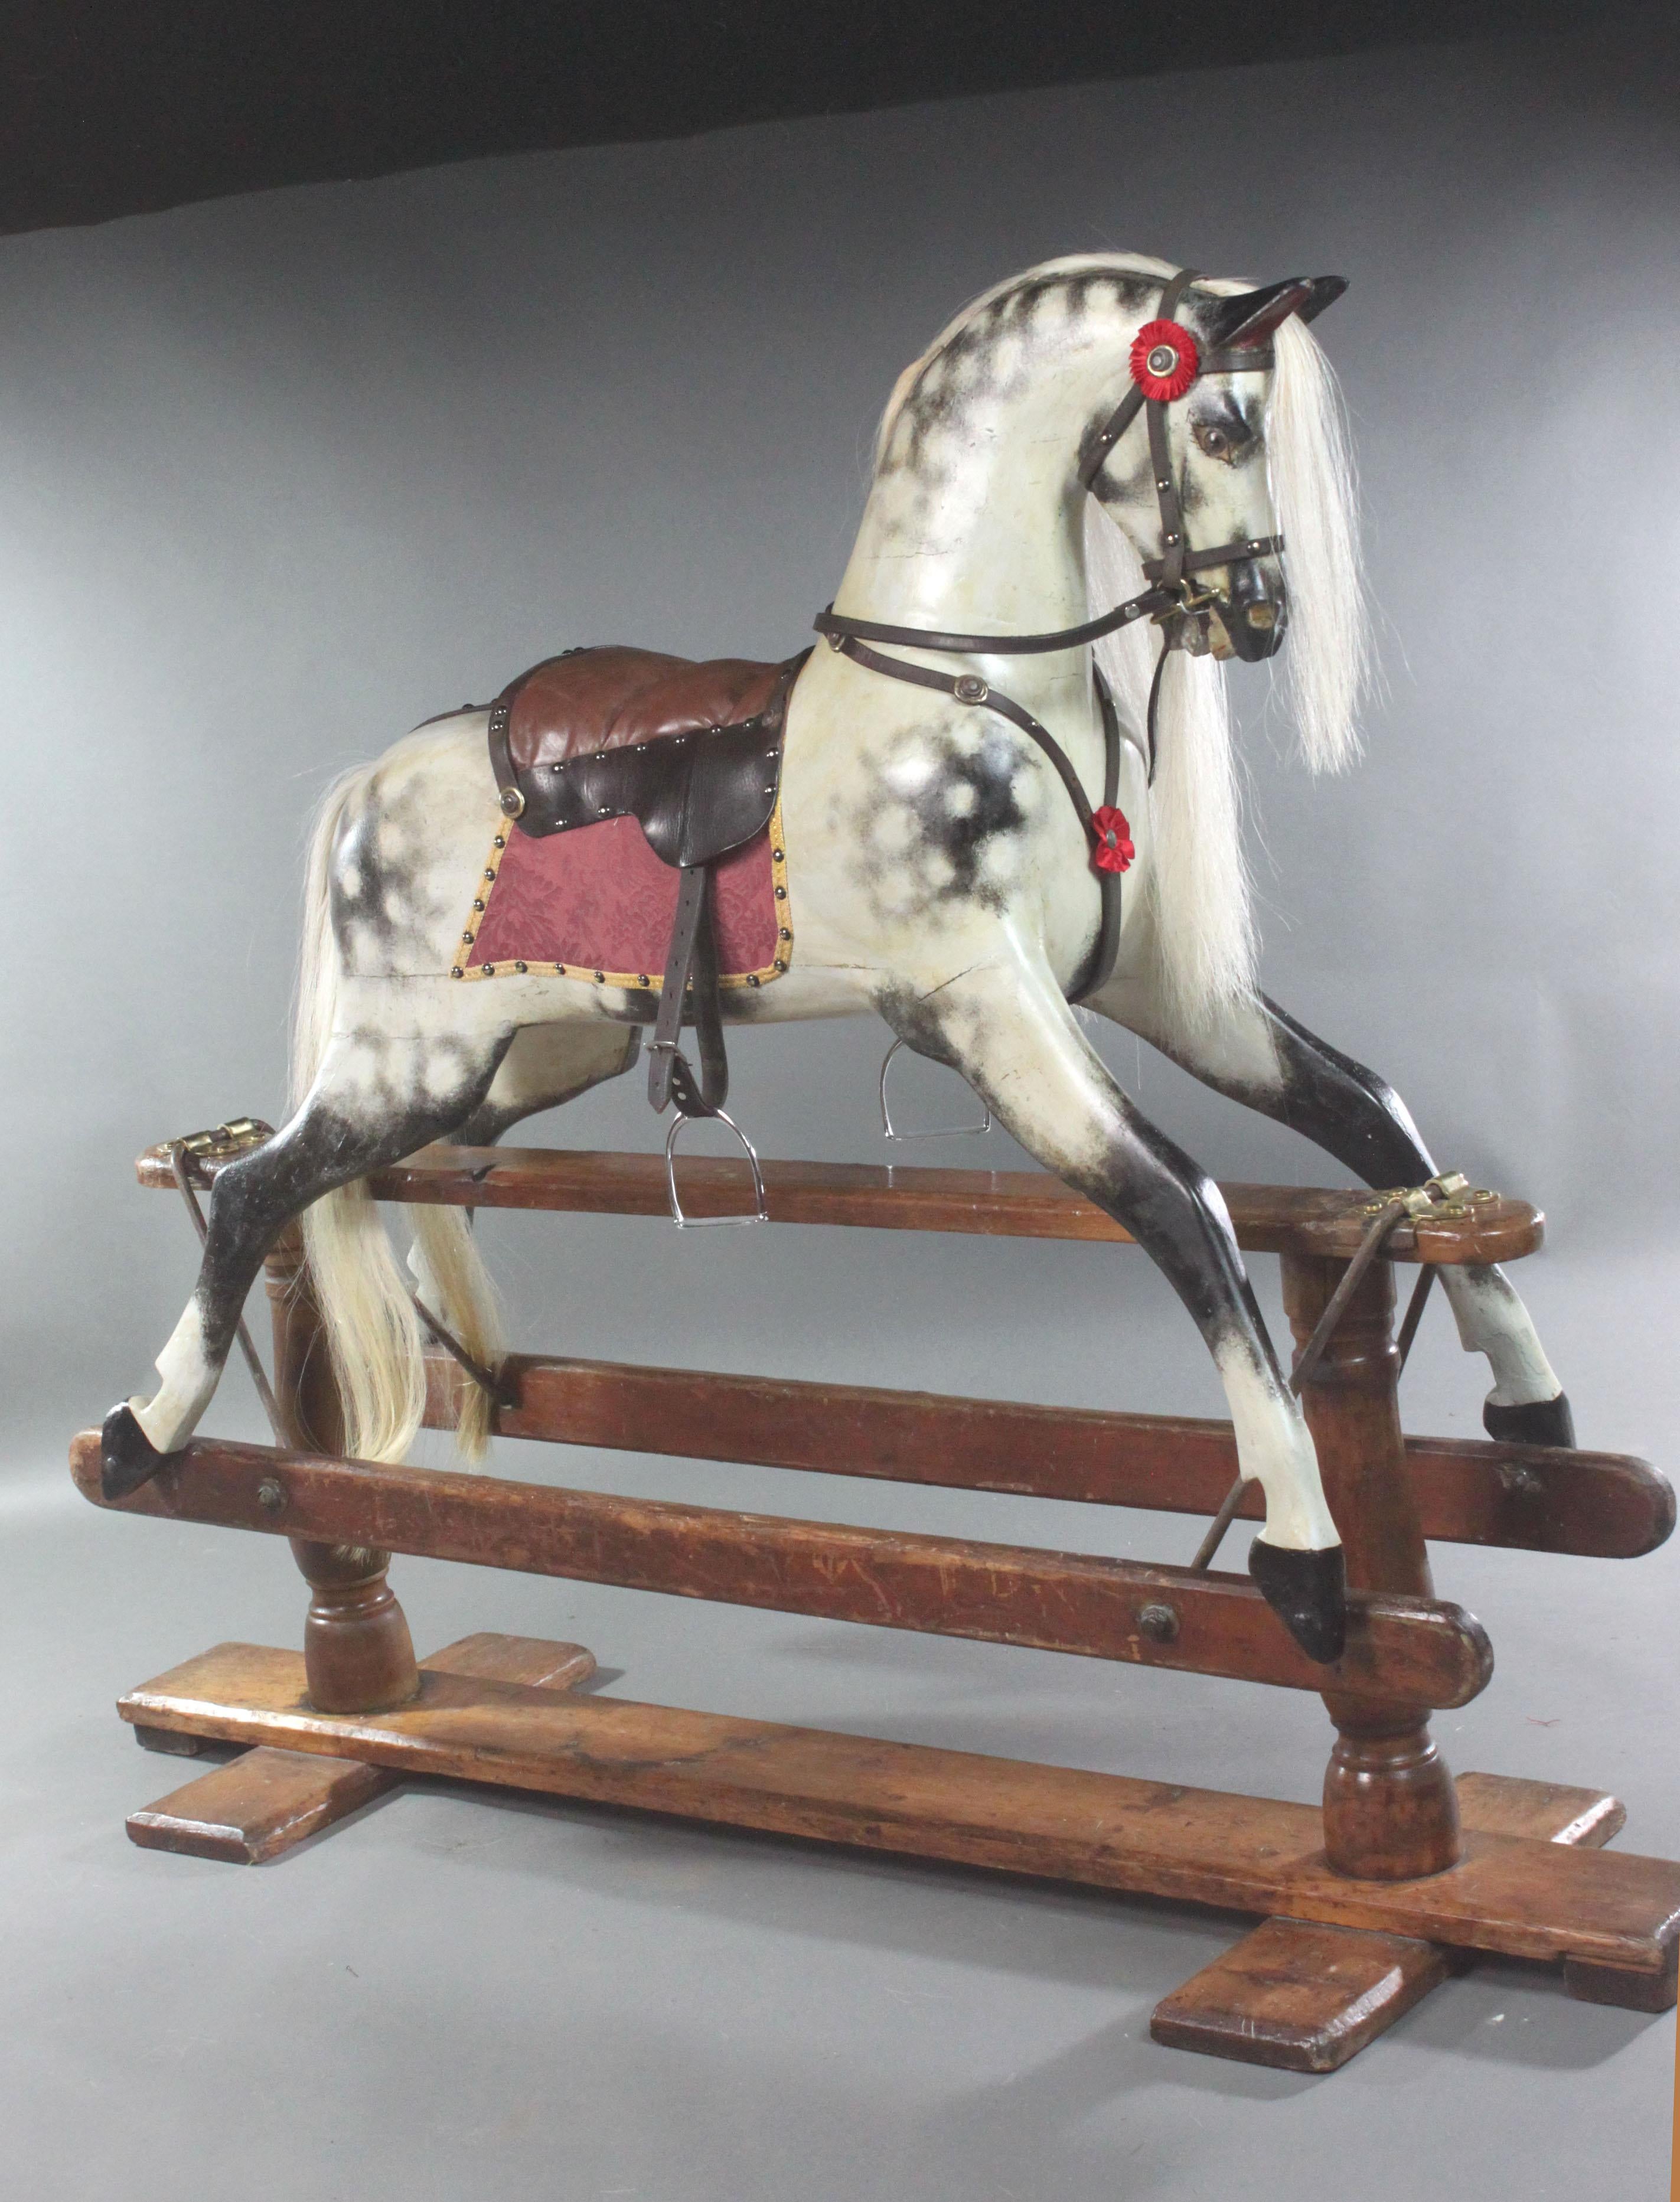 A handsome large carved wooden rocking horse by F.H.Ayres on its original stand with turned pillars and the head slightly tilted. The horse has been sensitively restored retaining much of its original paint and brass studs; we used old horse tack